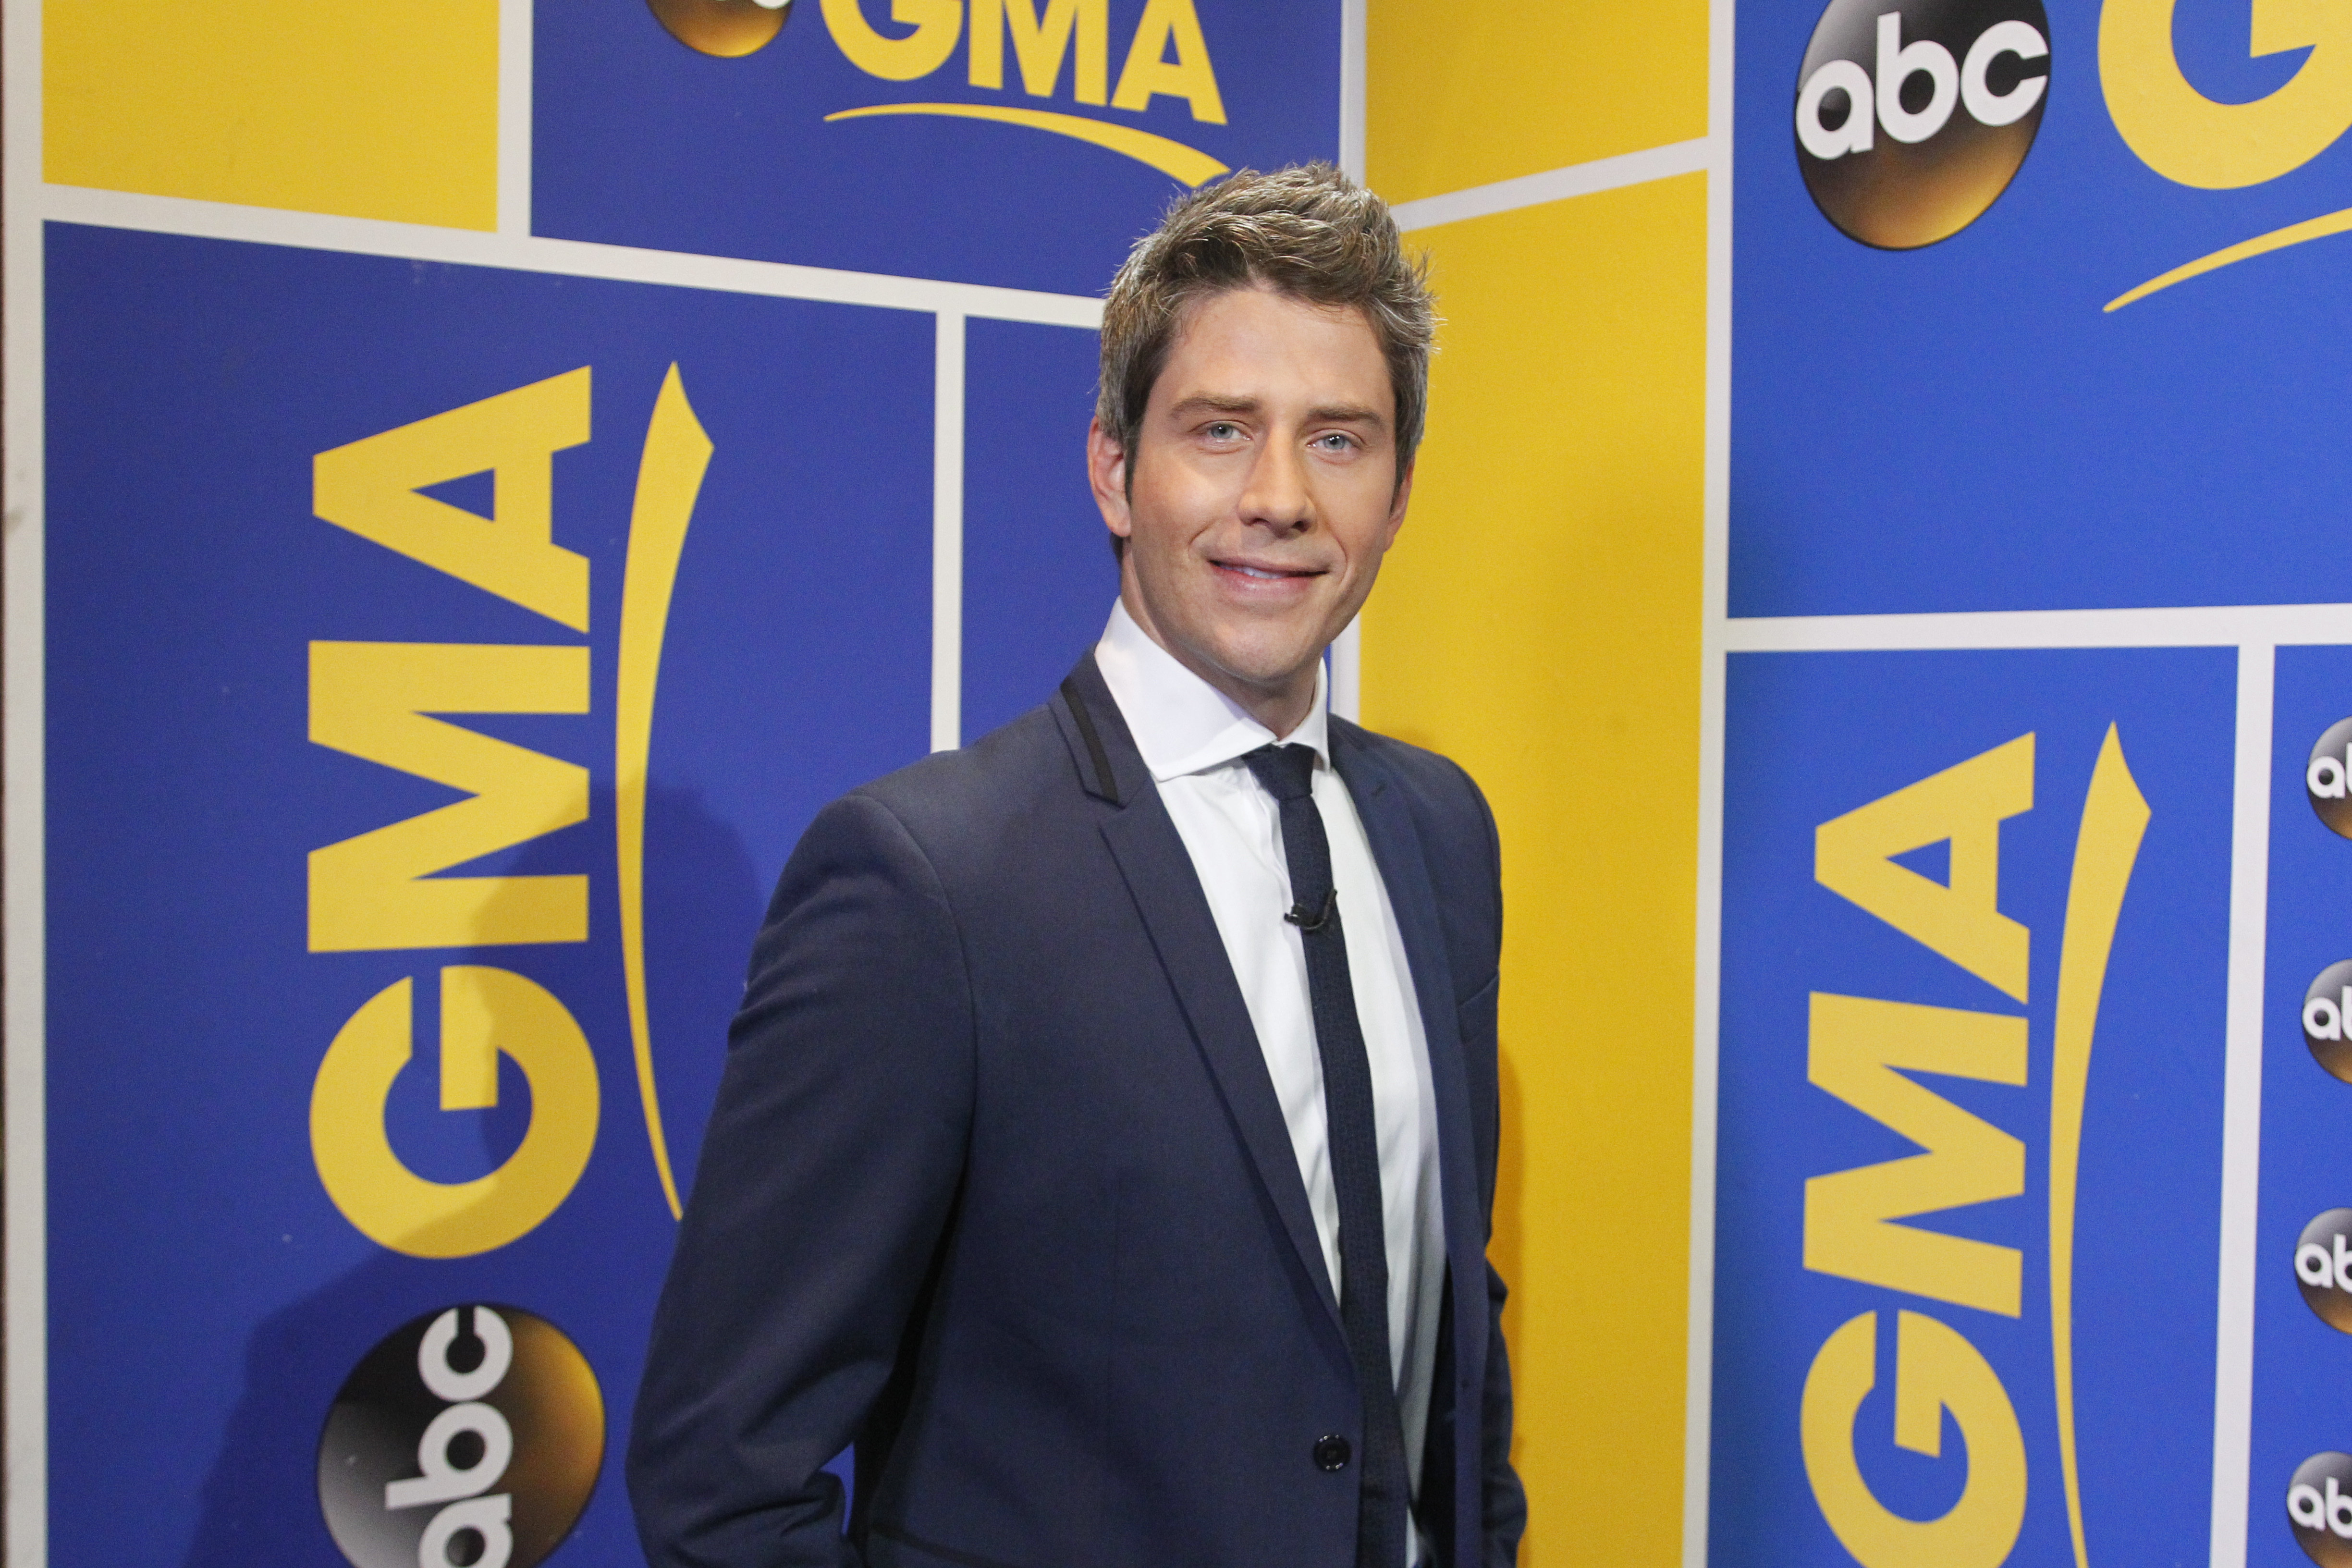 The Bachelor ABC Previews Season 22 and Arie Luyendyk Jr's Search for